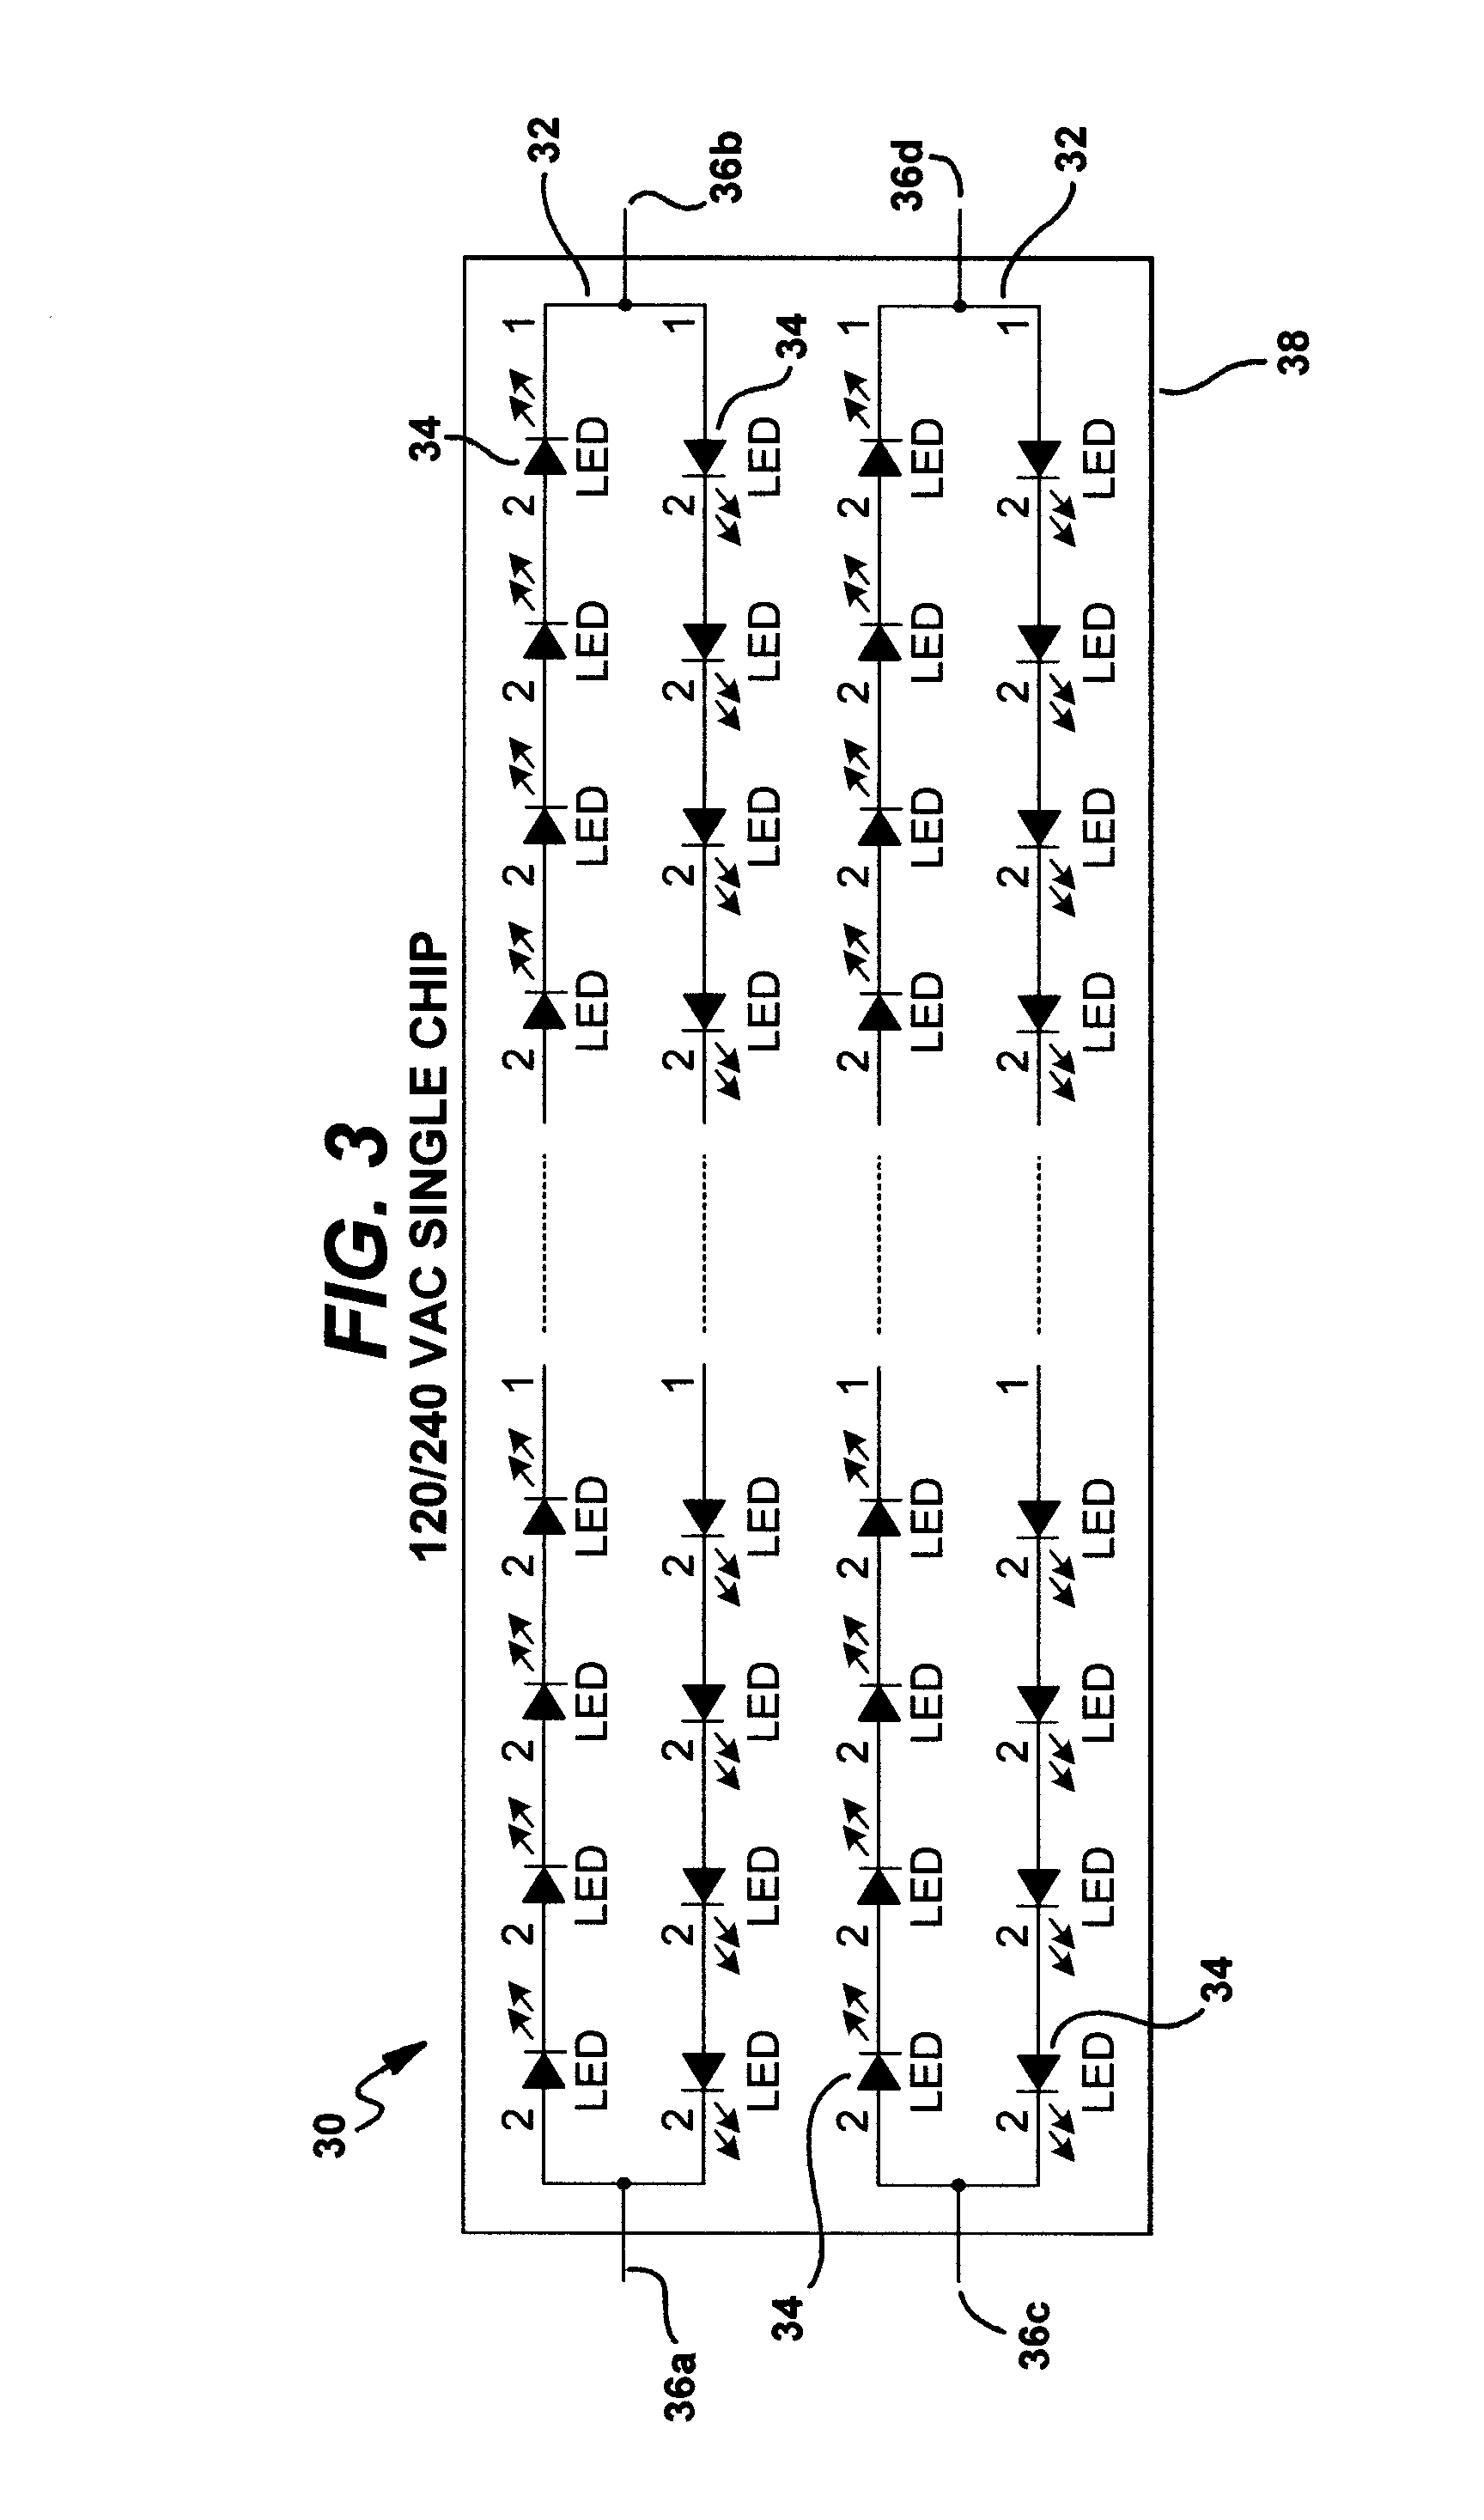 Multi-voltage and multi-brightness LED lighting devices and methods of using same